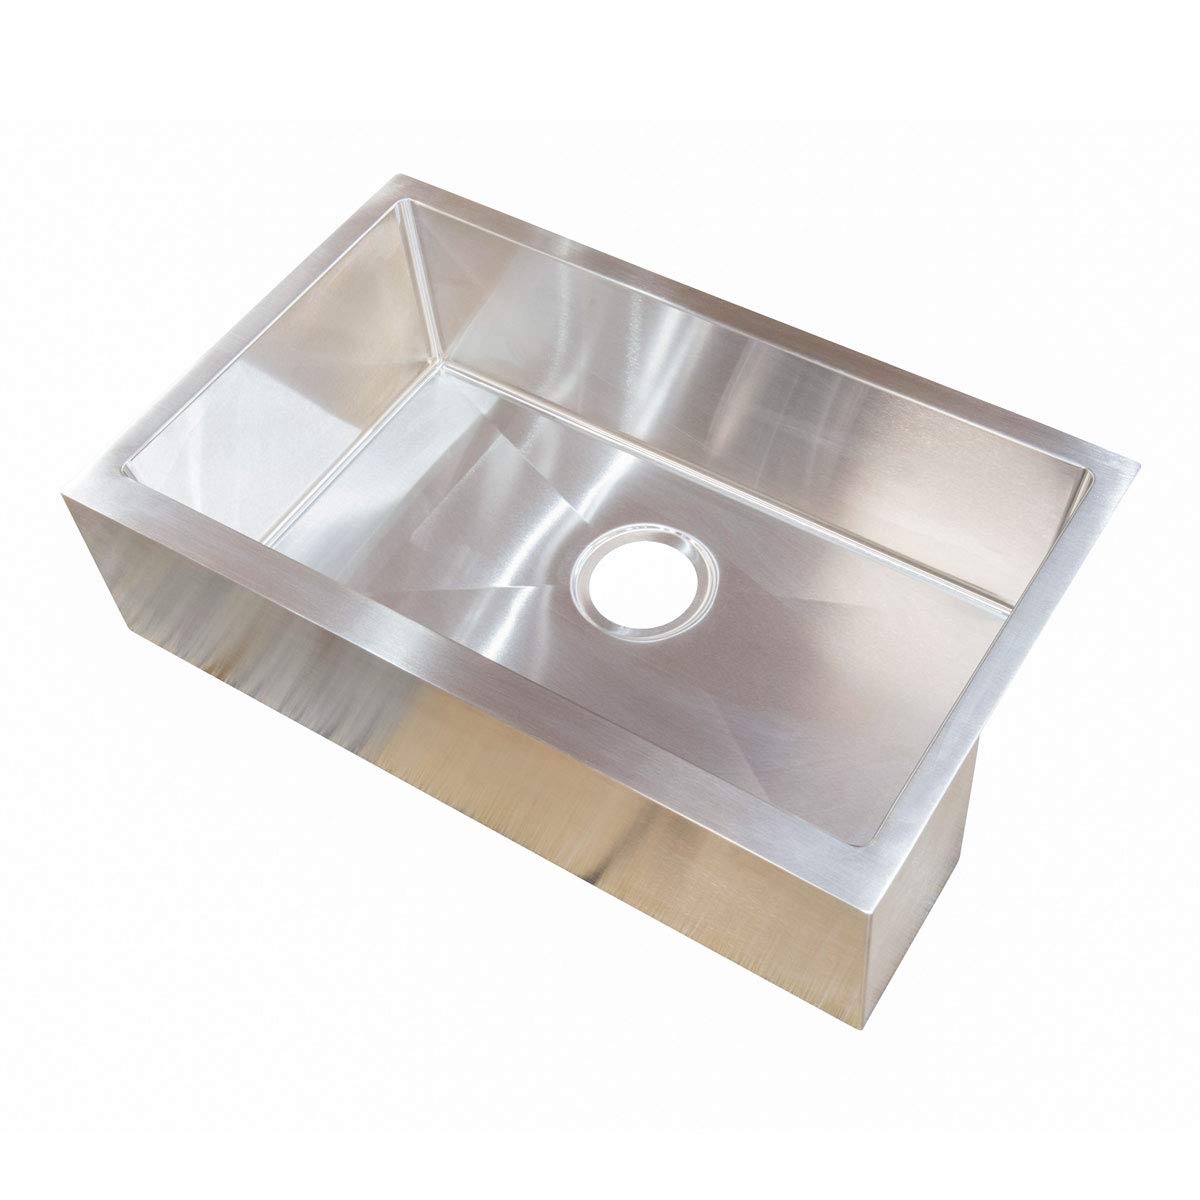 27X16X7 SINGLE BOWL STAINLESS STEEL SINK